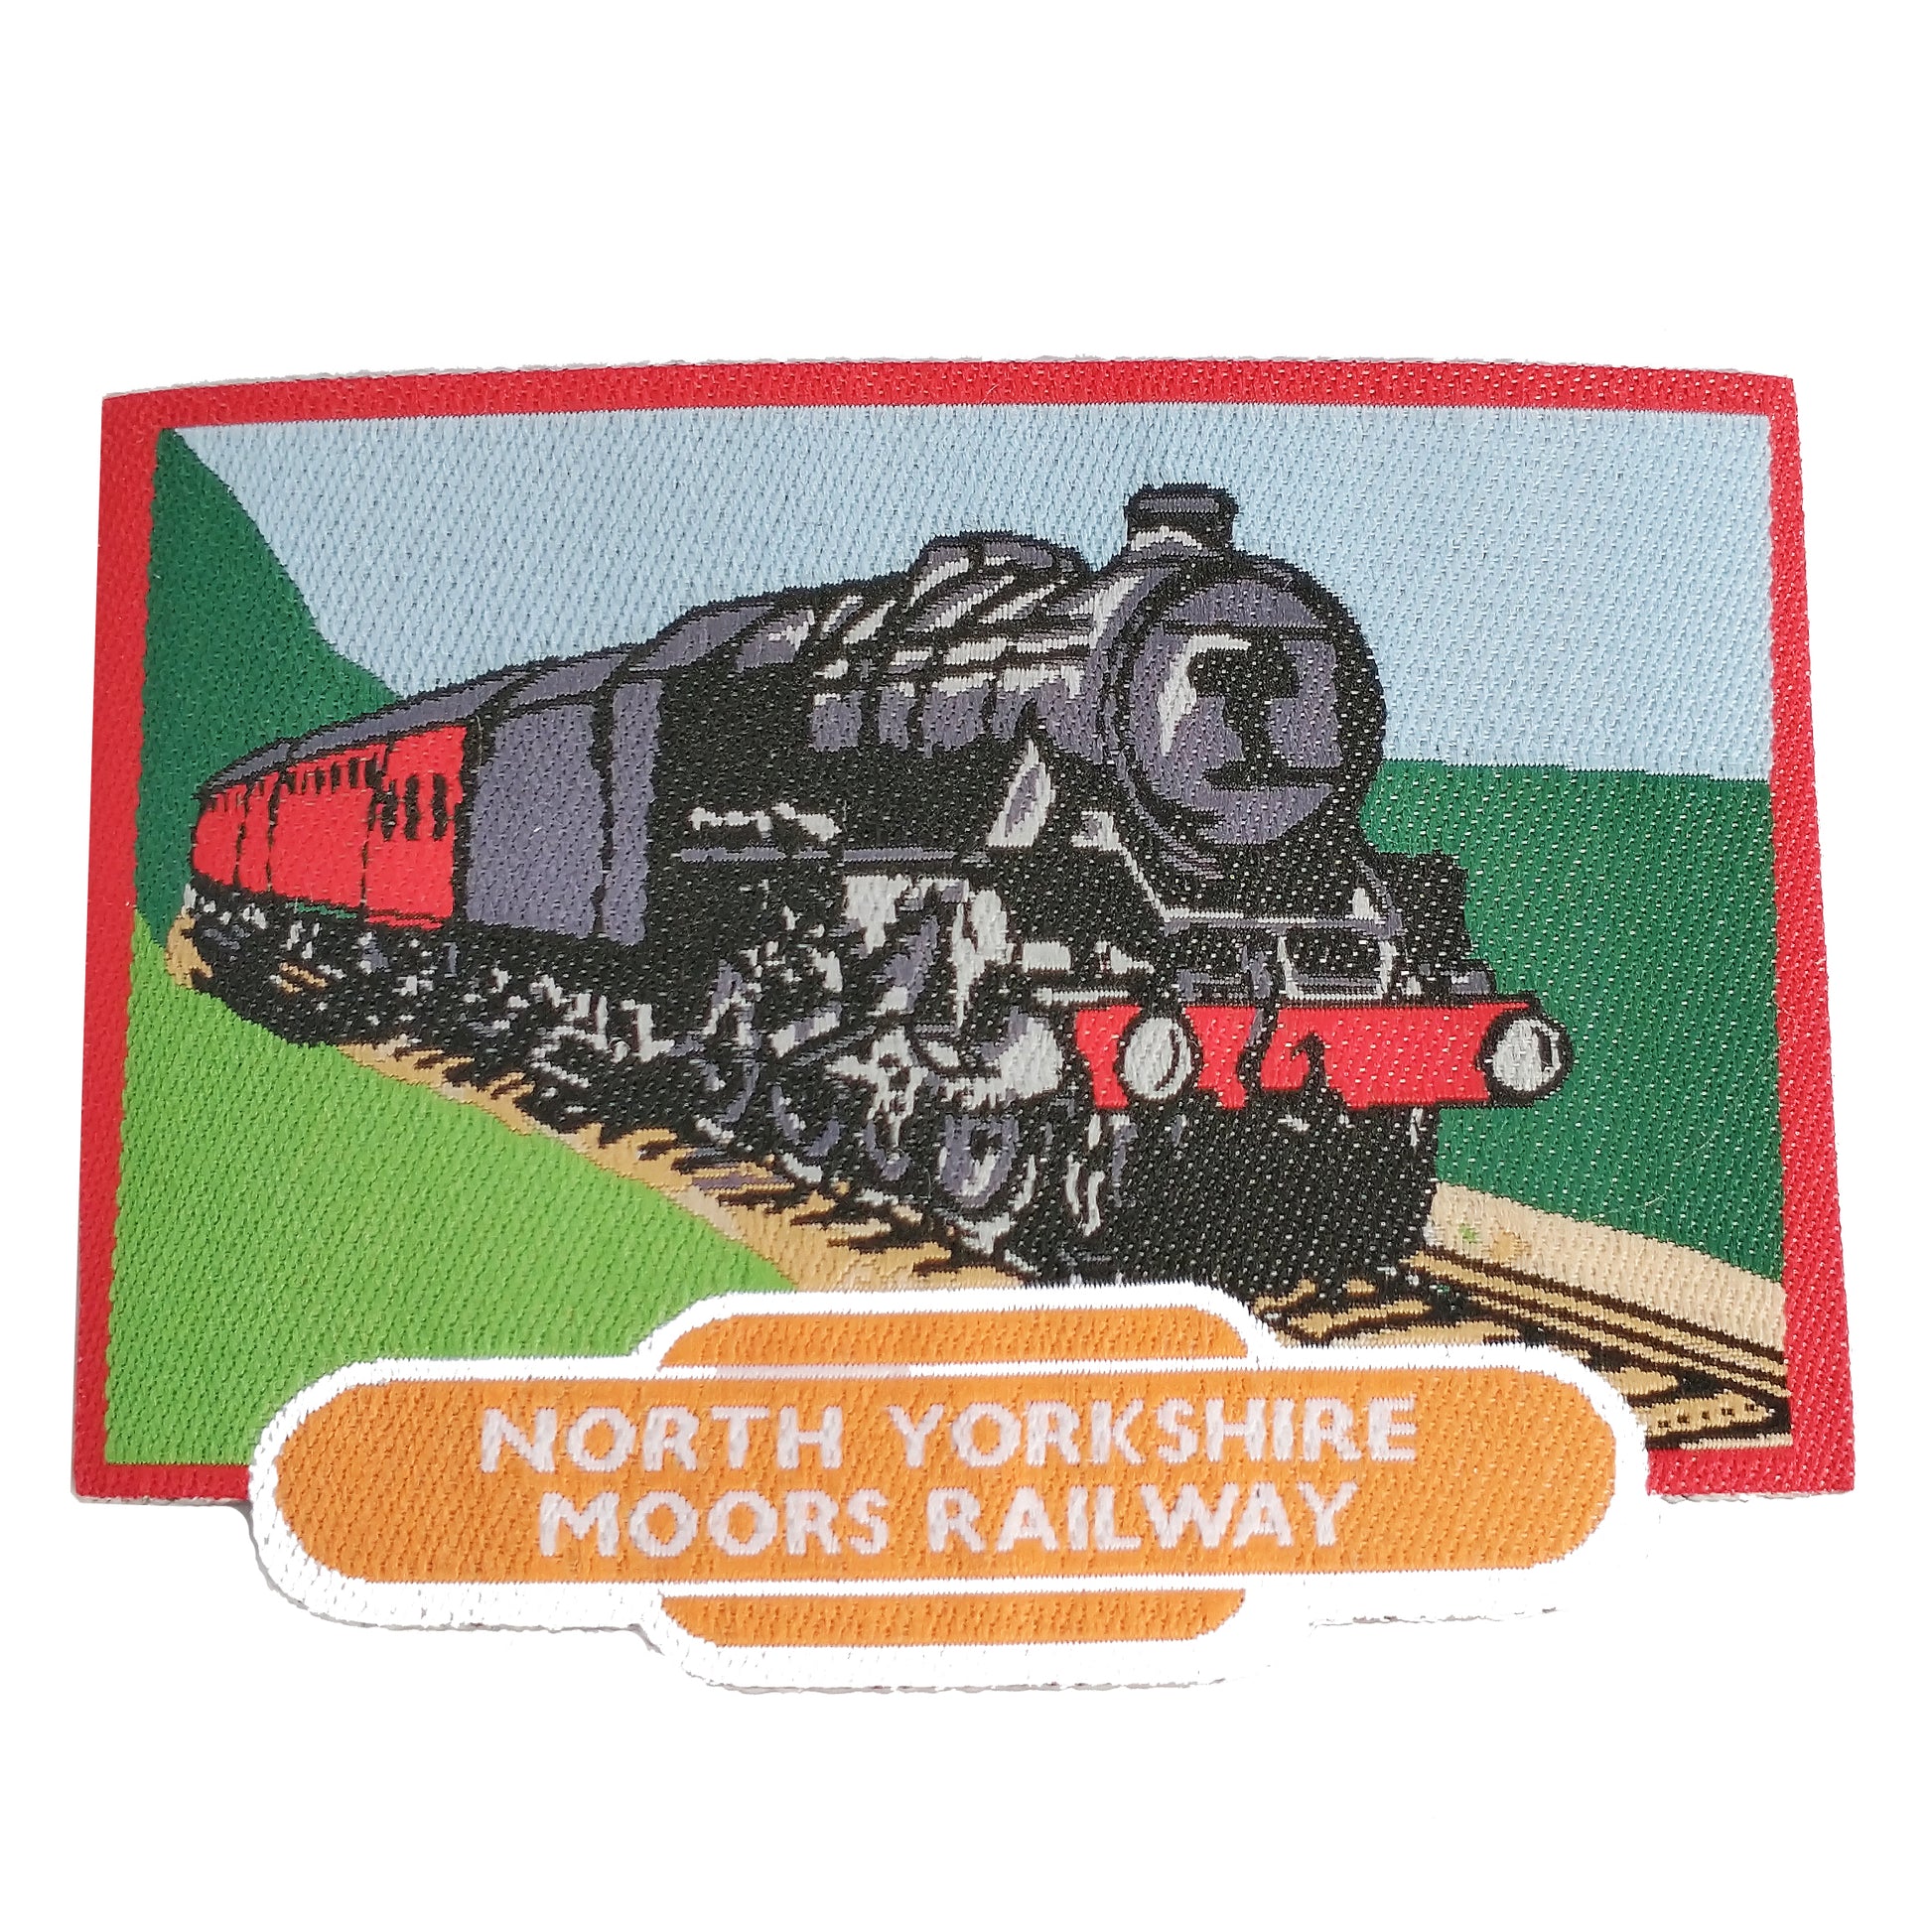 Oblong sew on badge with coloured picture of steam train and North Yorkshire Moors Railway embroidered in white on an orange totem at the bottom.